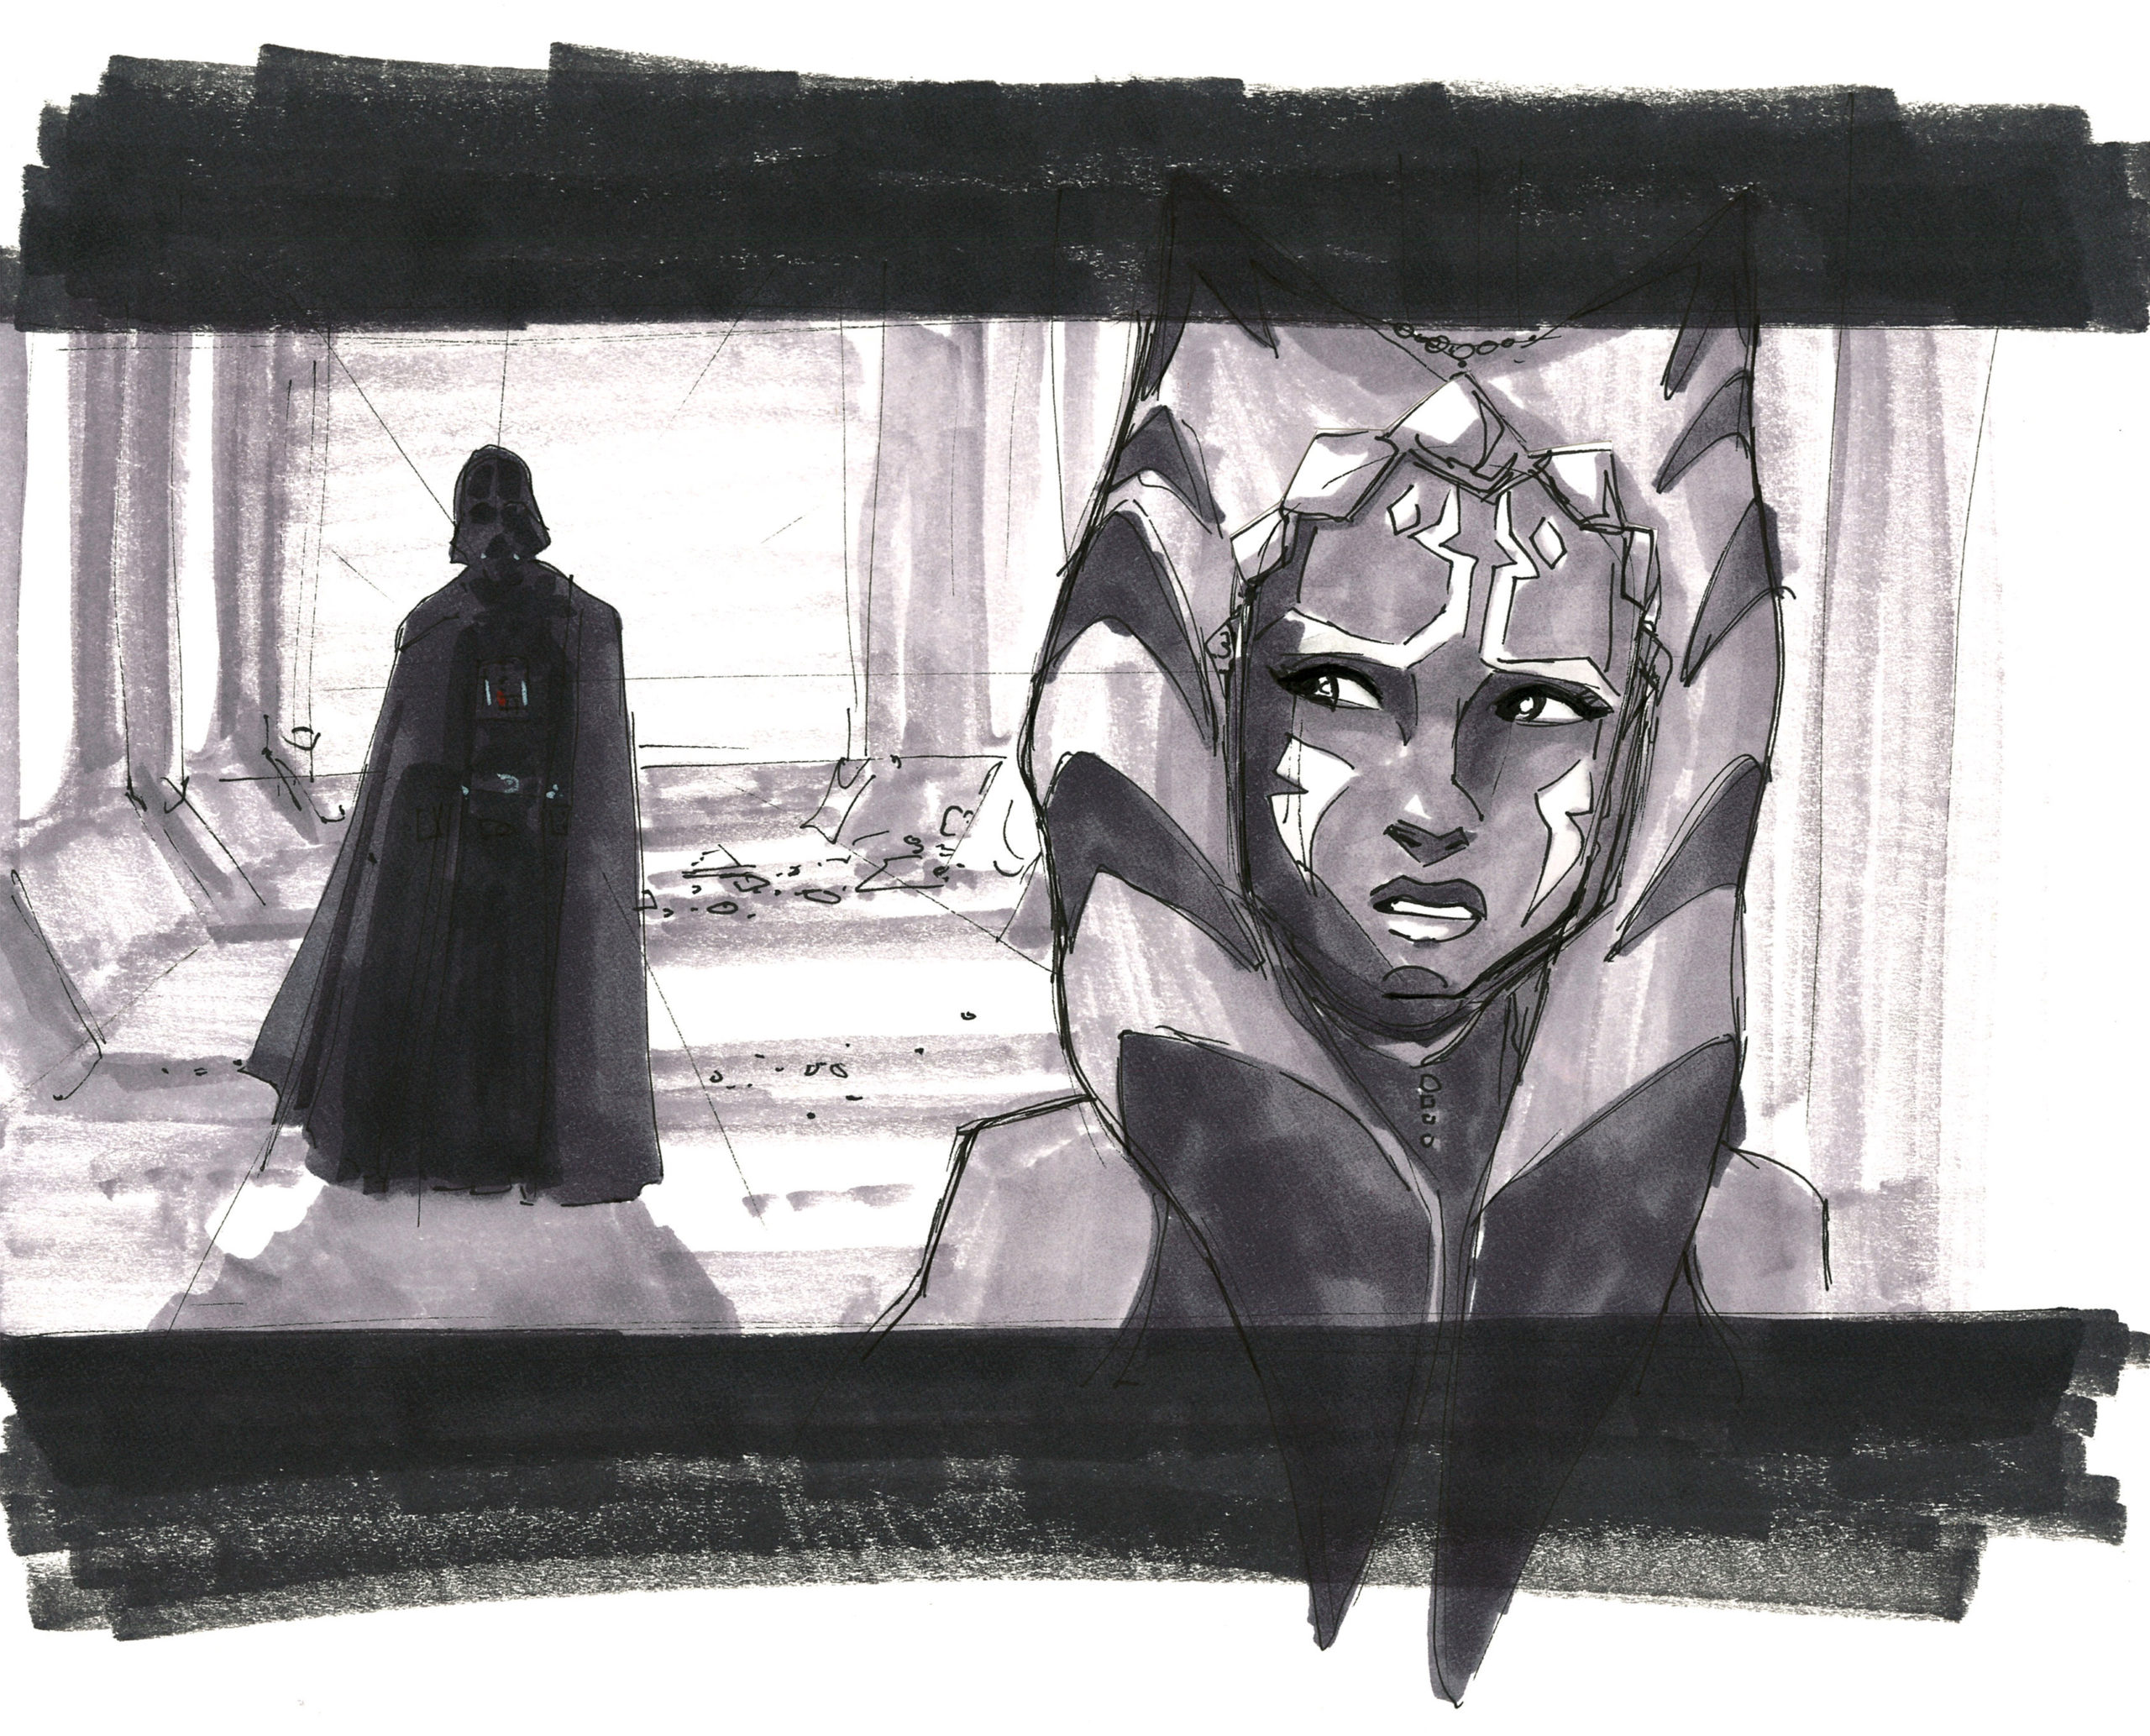 The Art That Inspired Ahsoka And Darth Vader’s Epic Duel In Star Wars Rebels